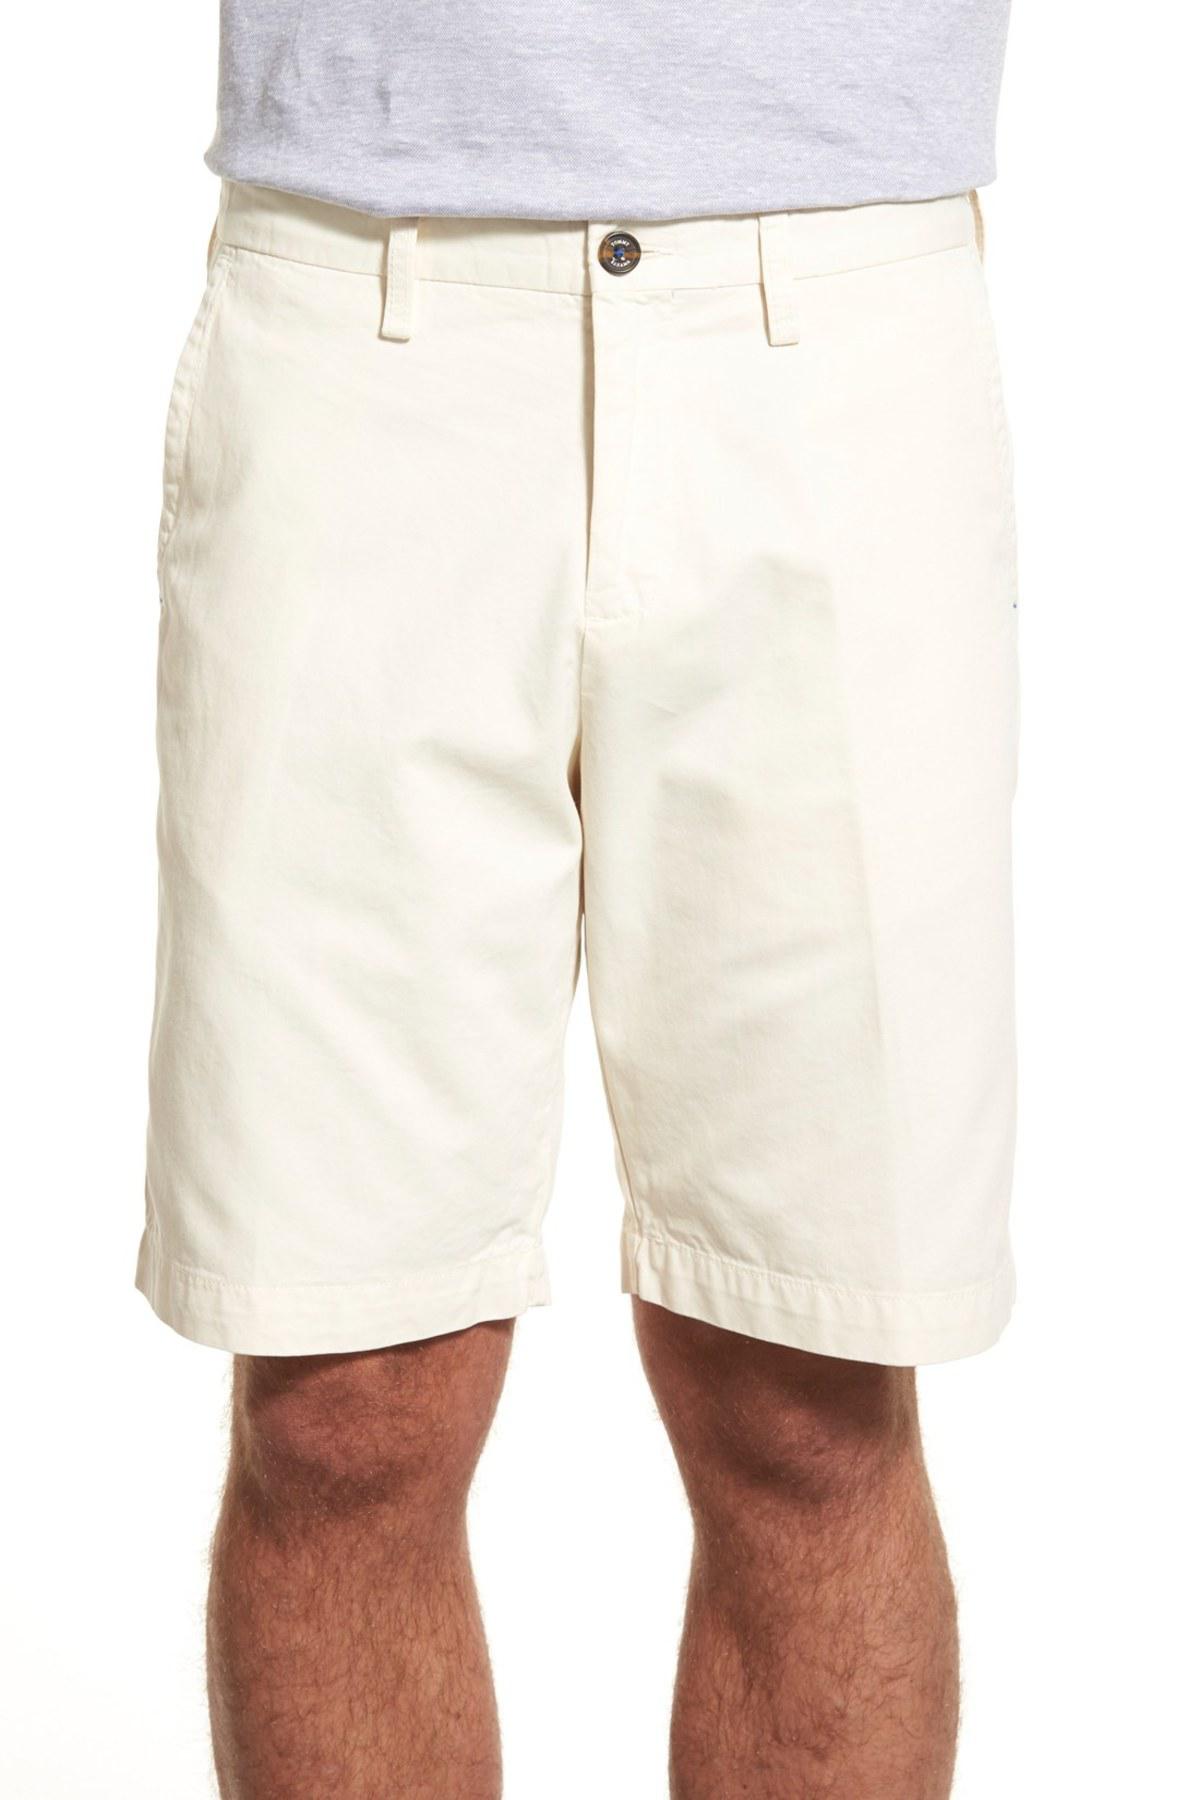 Lyst - Tommy Bahama 'island' Chino Shorts in Natural for Men